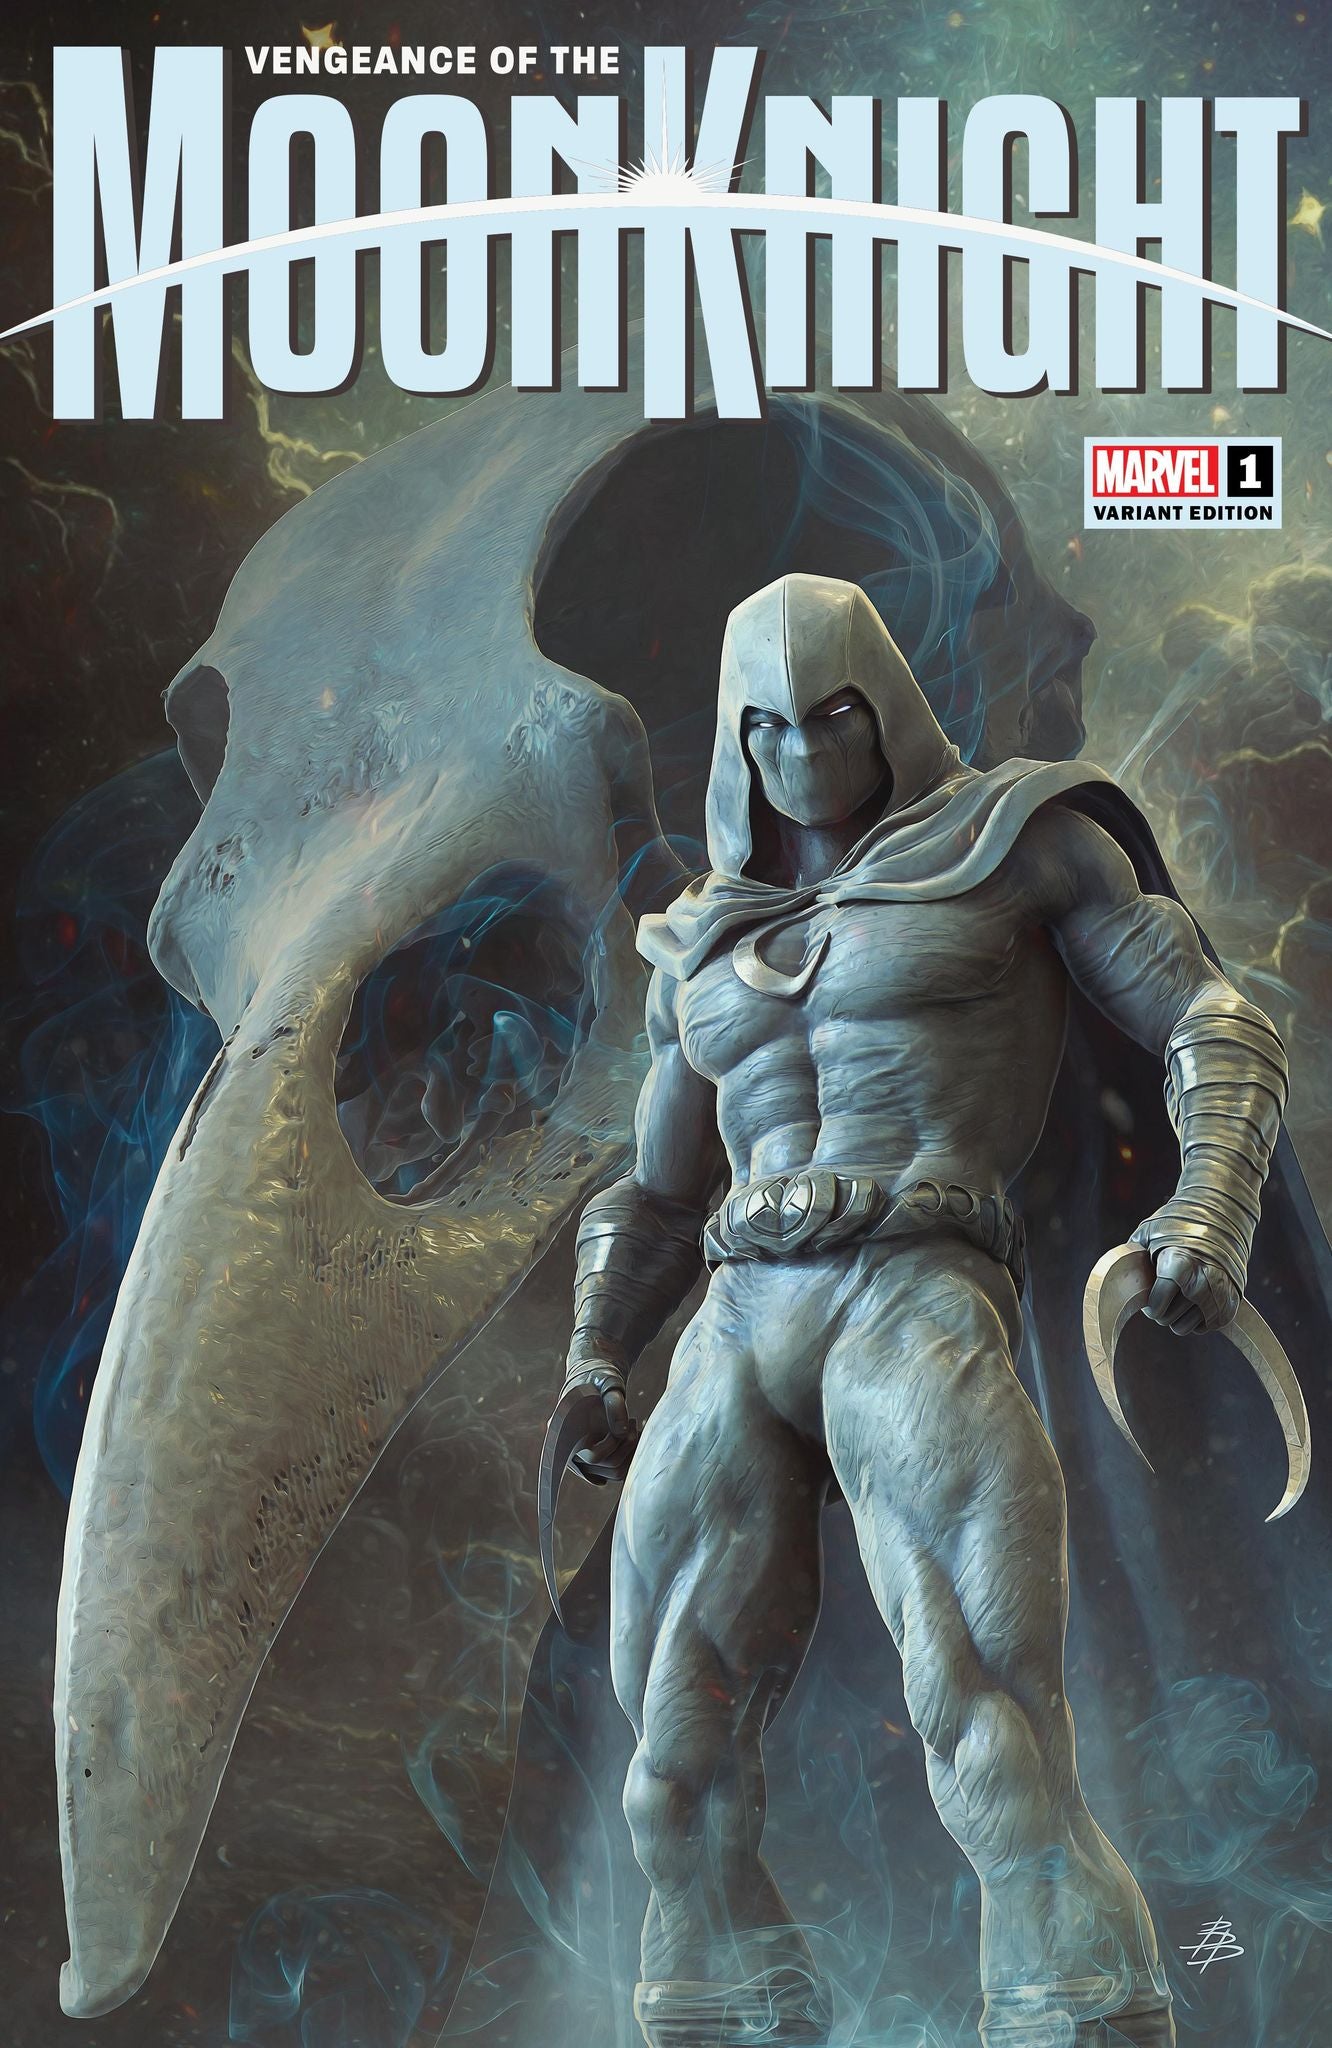 VENGEANCE OF MOON KNIGHT #1 BY BJORN BARENDS